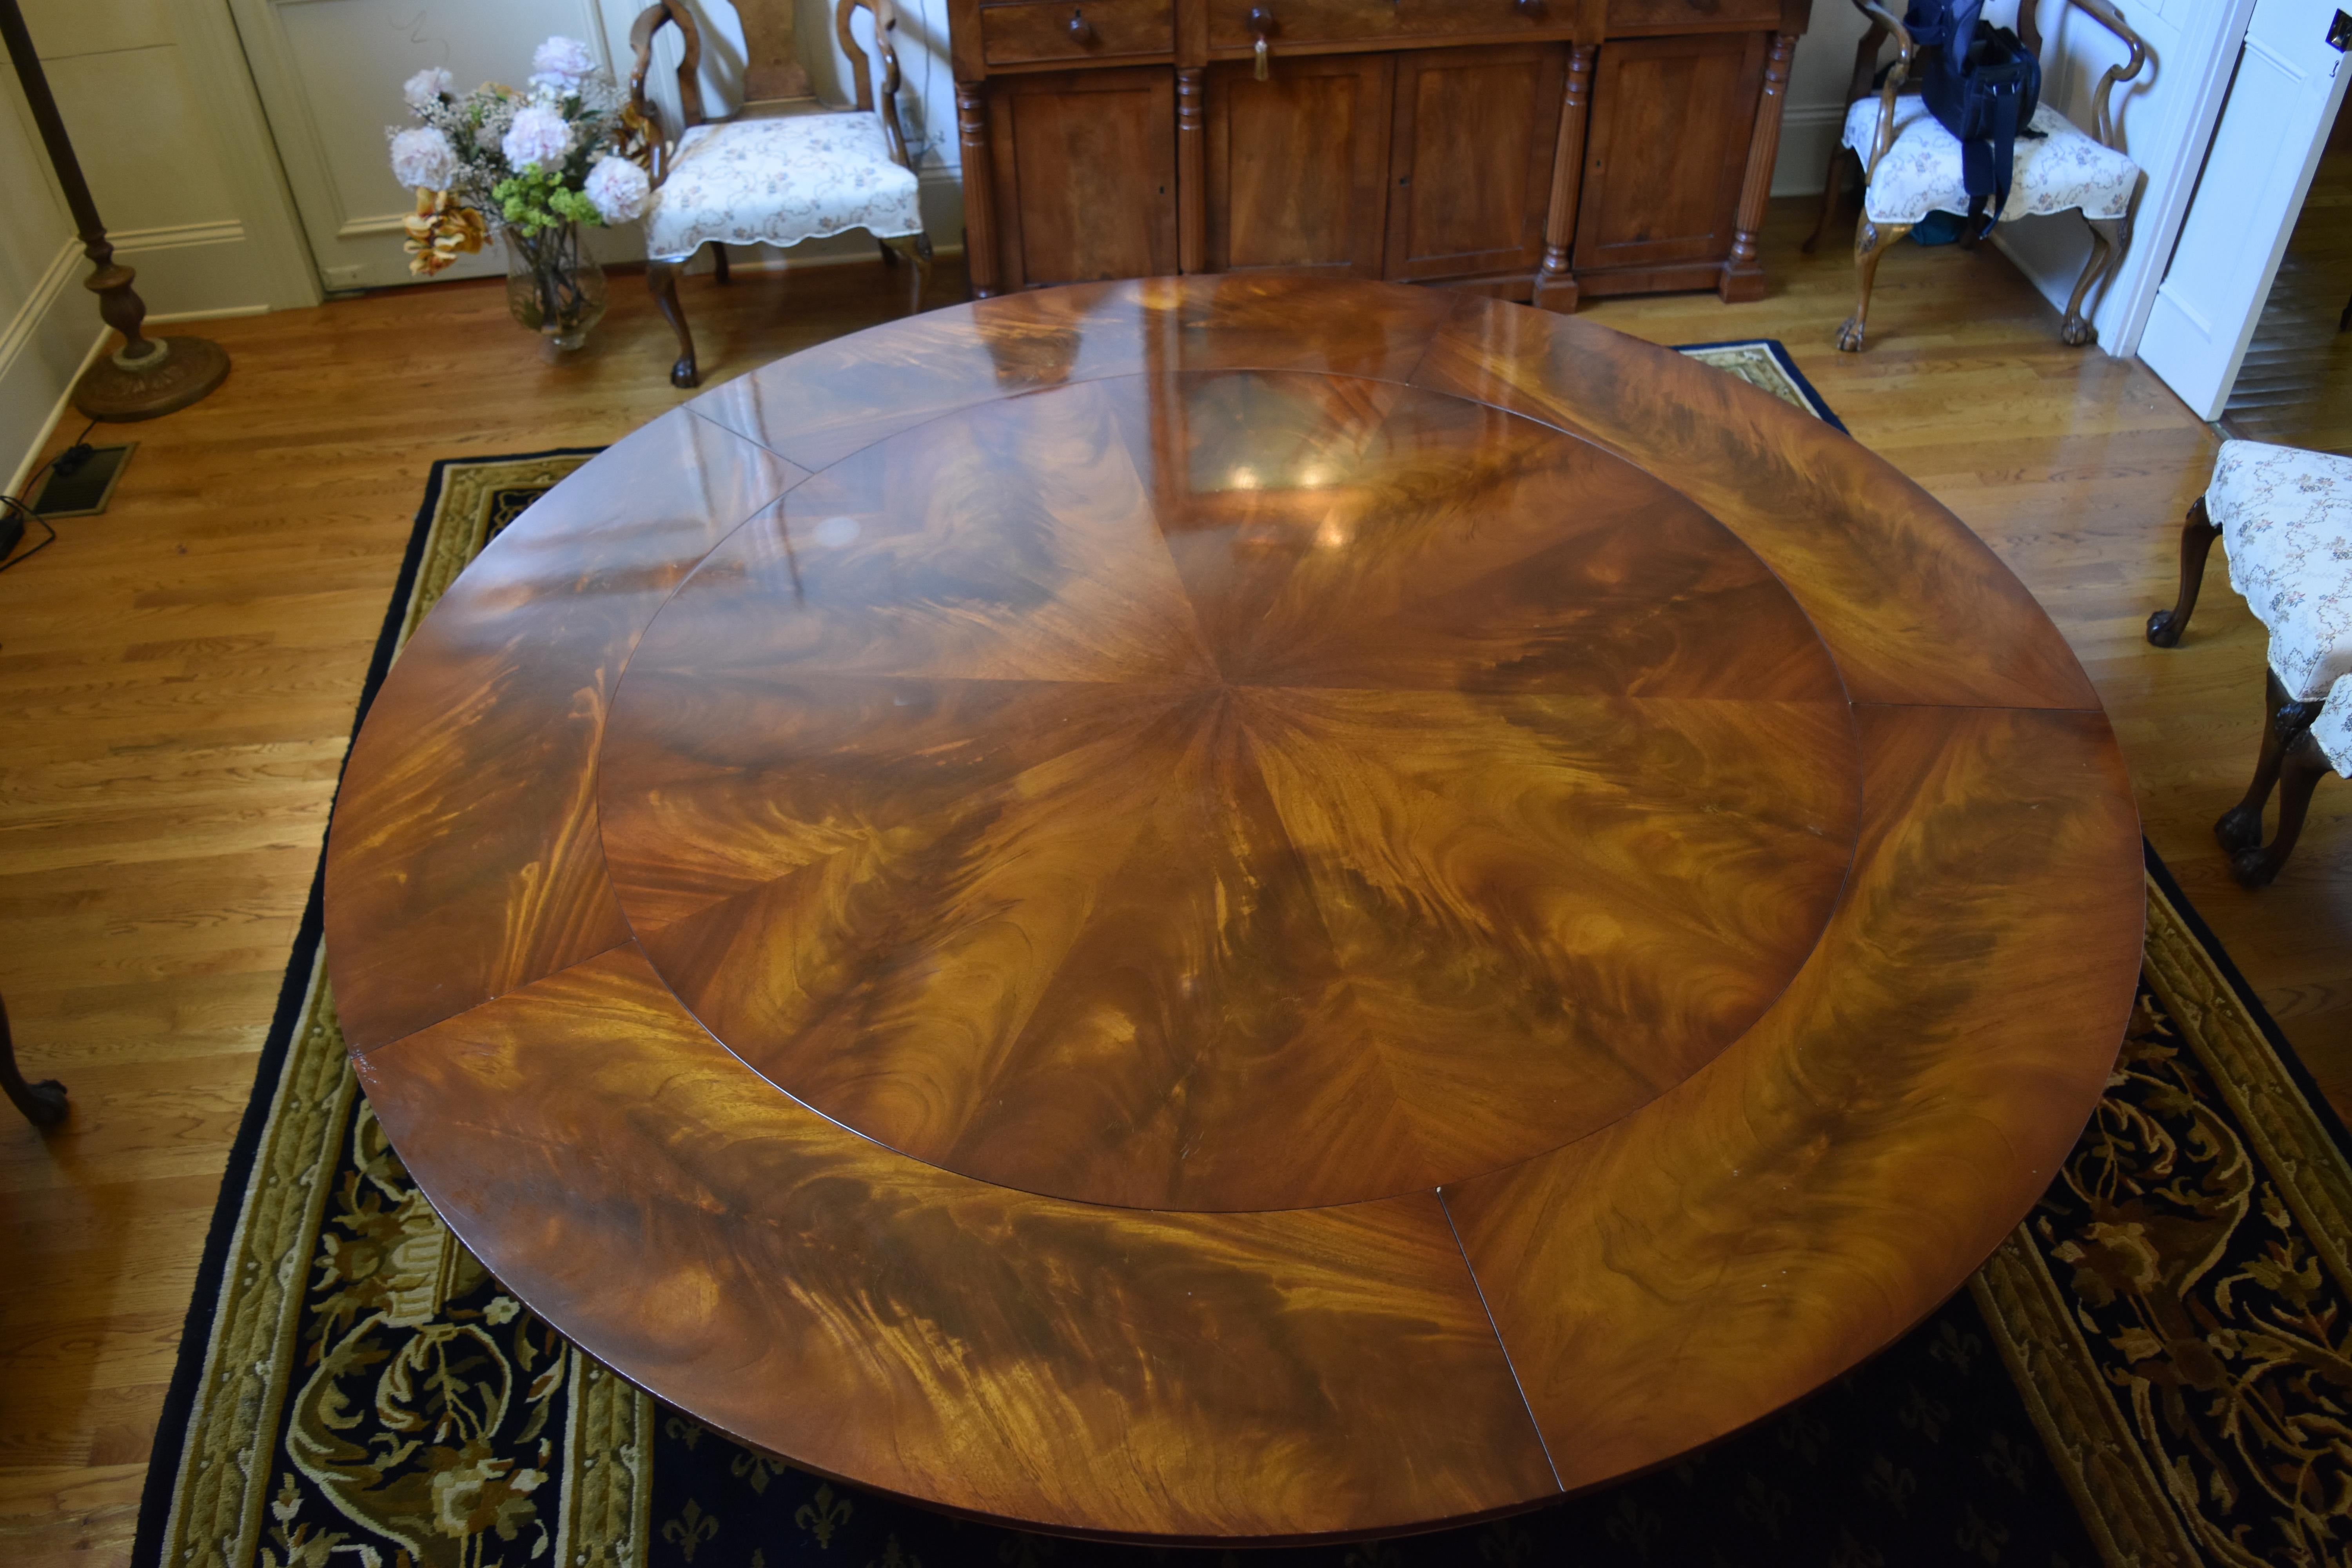 This Regency style 82 inch round flame mahogany dining table with a 4 post pedestal base was purchased new in 2002 from Mill House Antiques in Woodbury, Connecticut. The table has five leaves (each 12 inches) which can be added to the circumference